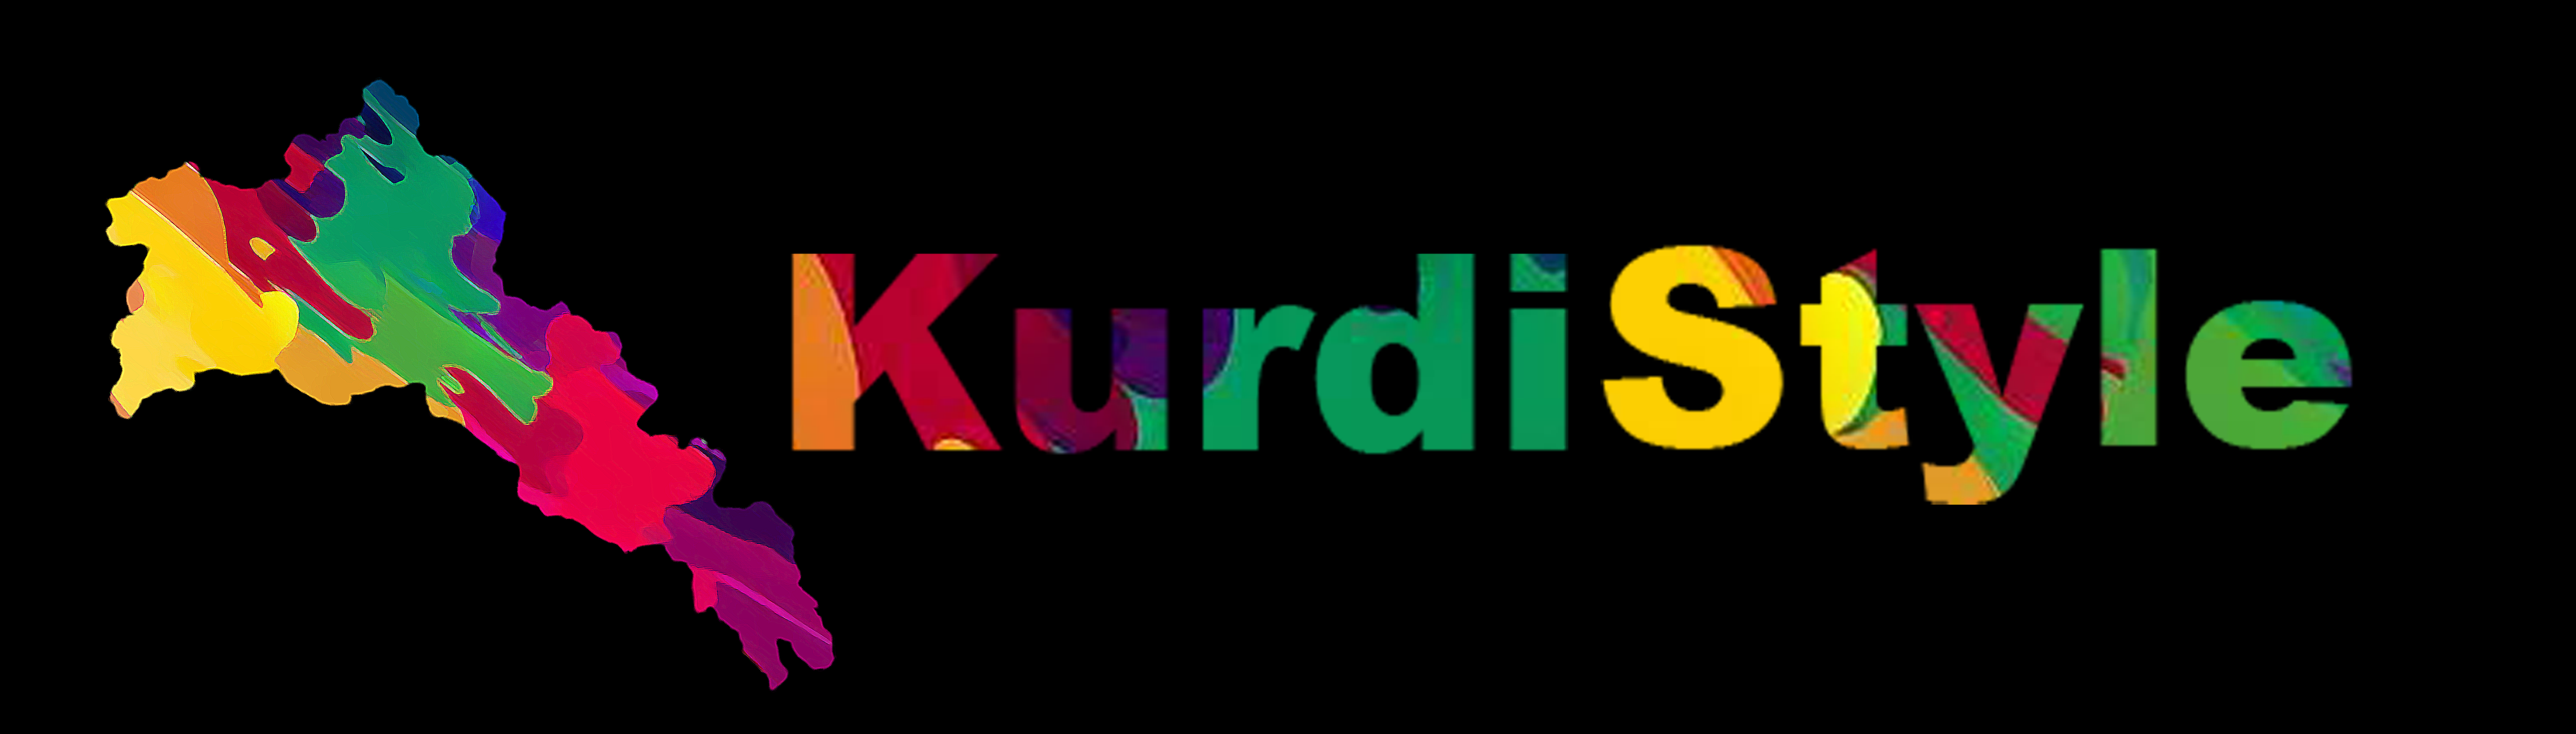 Your online shop for Kurdish art, design, stickers, photography, clothing, accessories, decor, gifts 